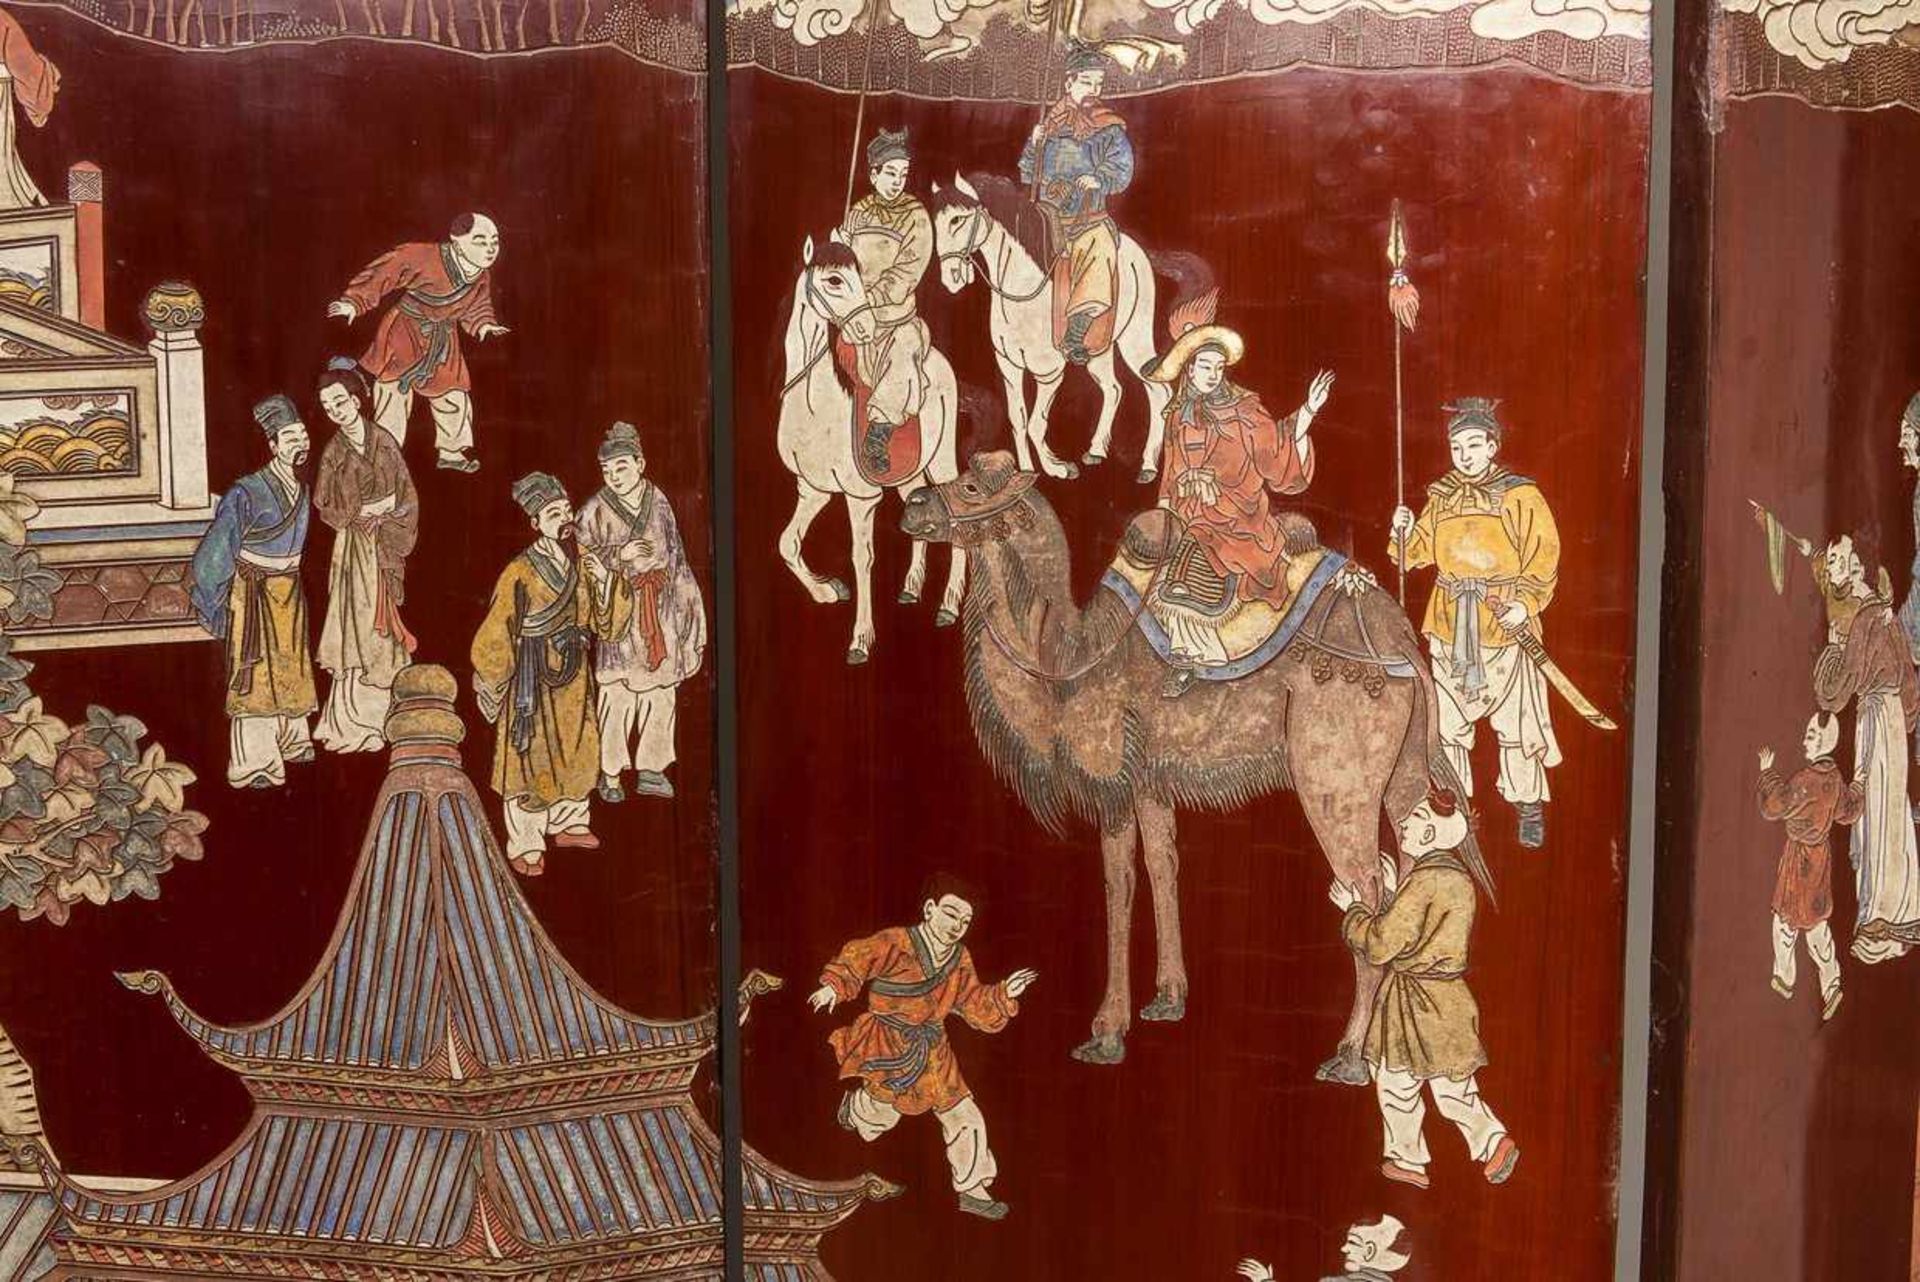 LARGE SIX-PART KOROMANDEL SCREEN DEPICTING AN IMPERIAL SCENE Wood, lacquer techniques. China, - Image 10 of 12